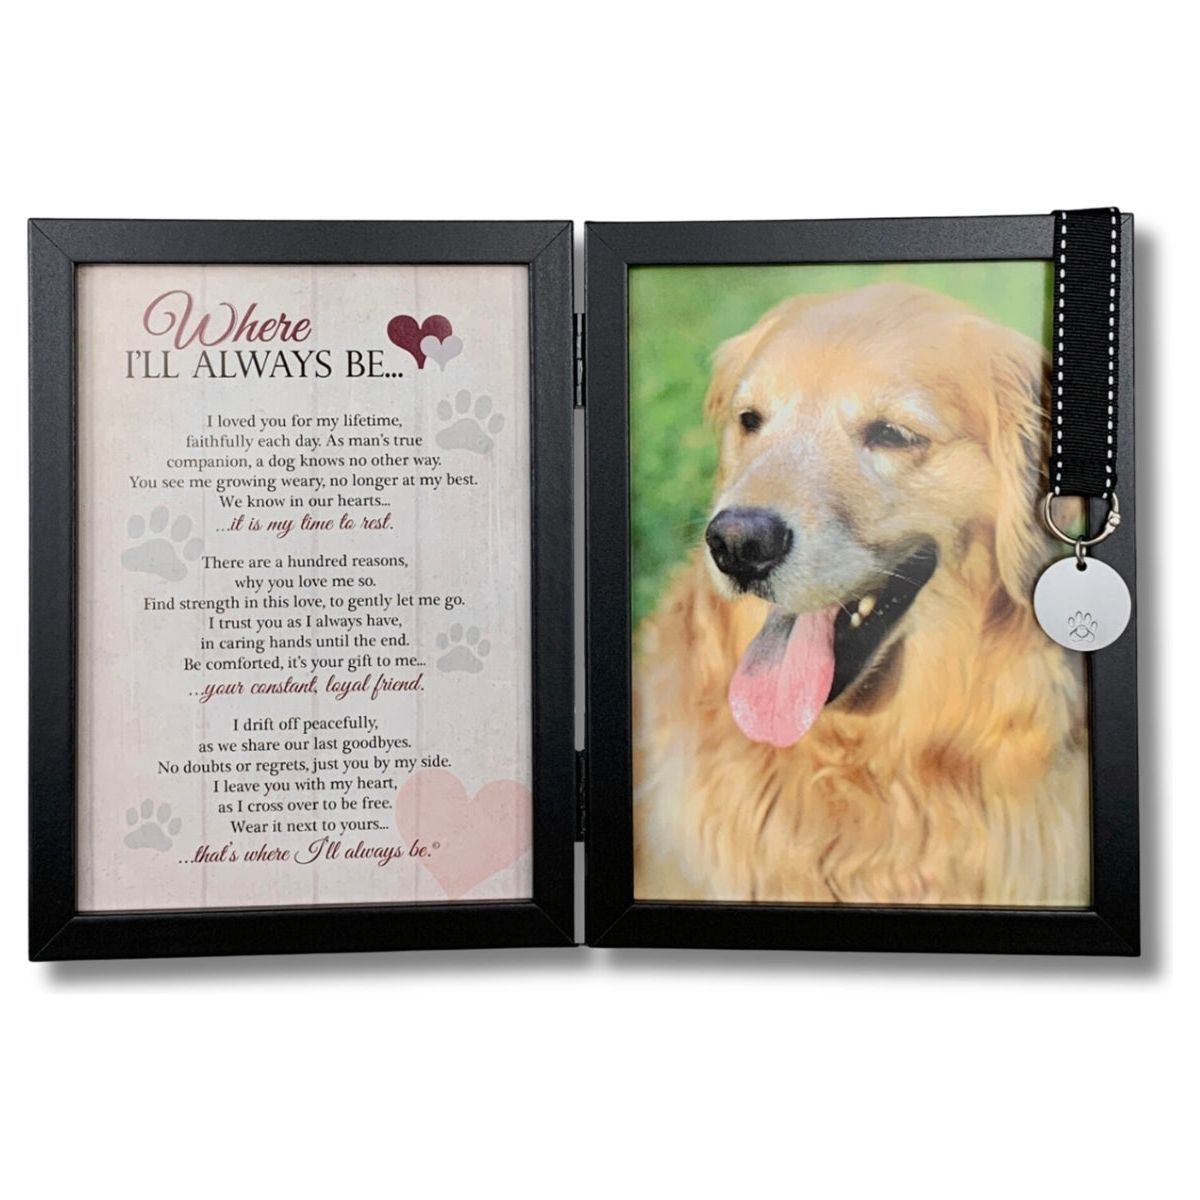 Black 5x7 double frame with a tag hanging from a ribbon. Left side of frame contains "Where I'll Always Be" poem. Space for a 5x7 photo of dog on right side.